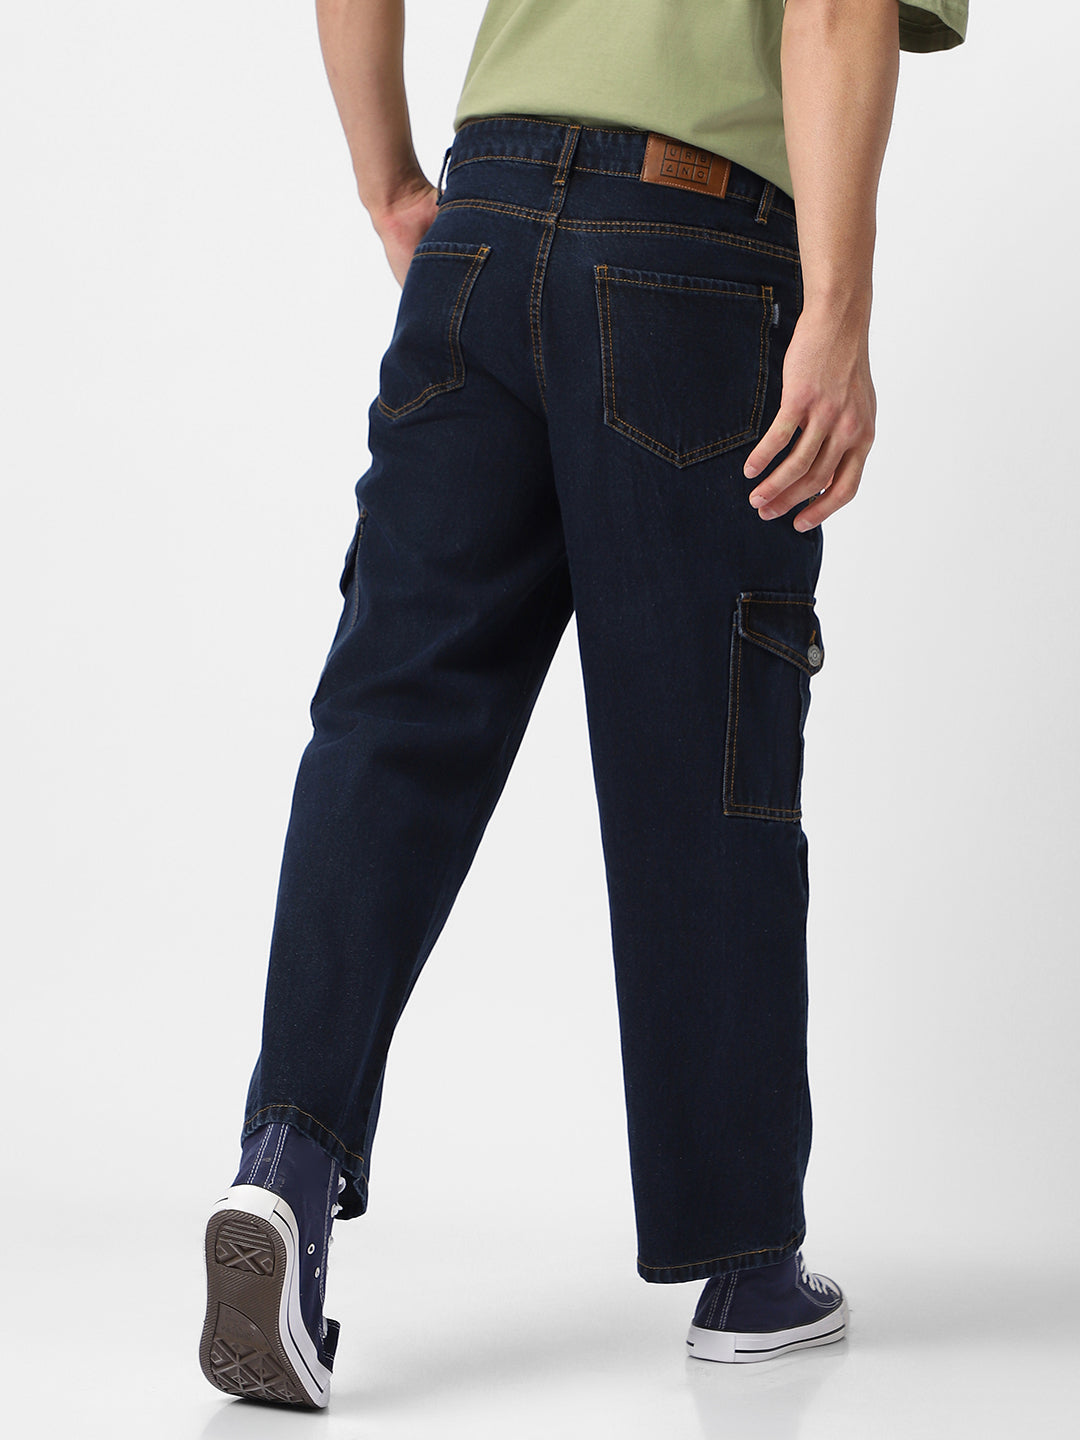 Men's Blue Loose Fit Cargo Jeans with 6 Pockets Non-Stretchable